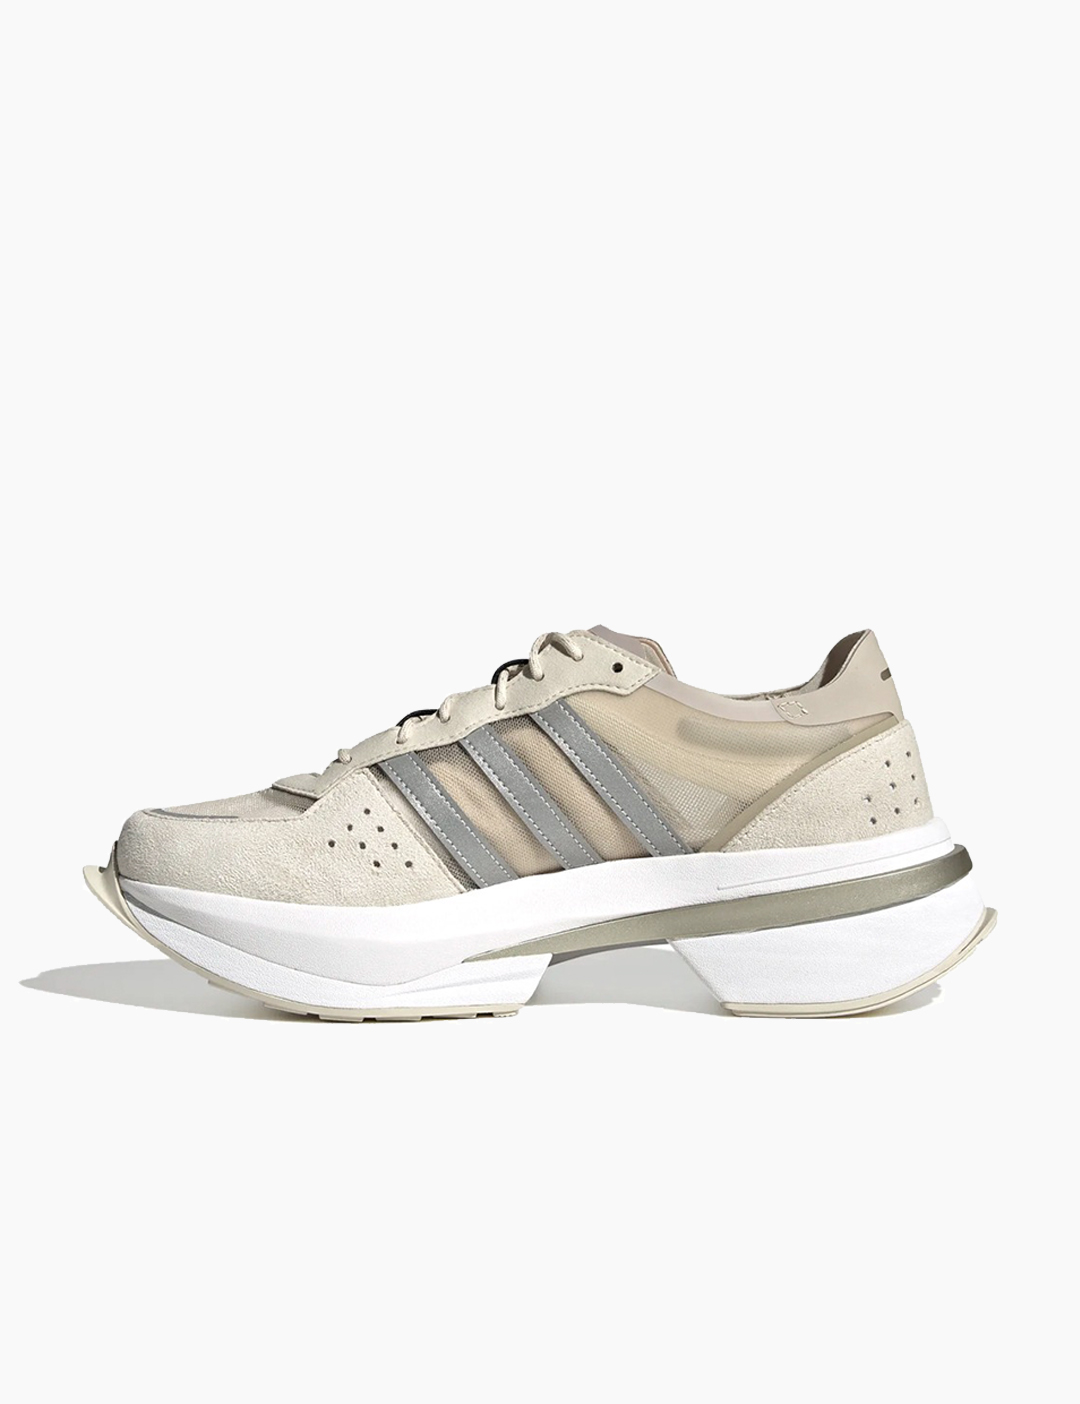 adidas Esiod in "Clay Brown" Release 2022 | Drops Hypebeast